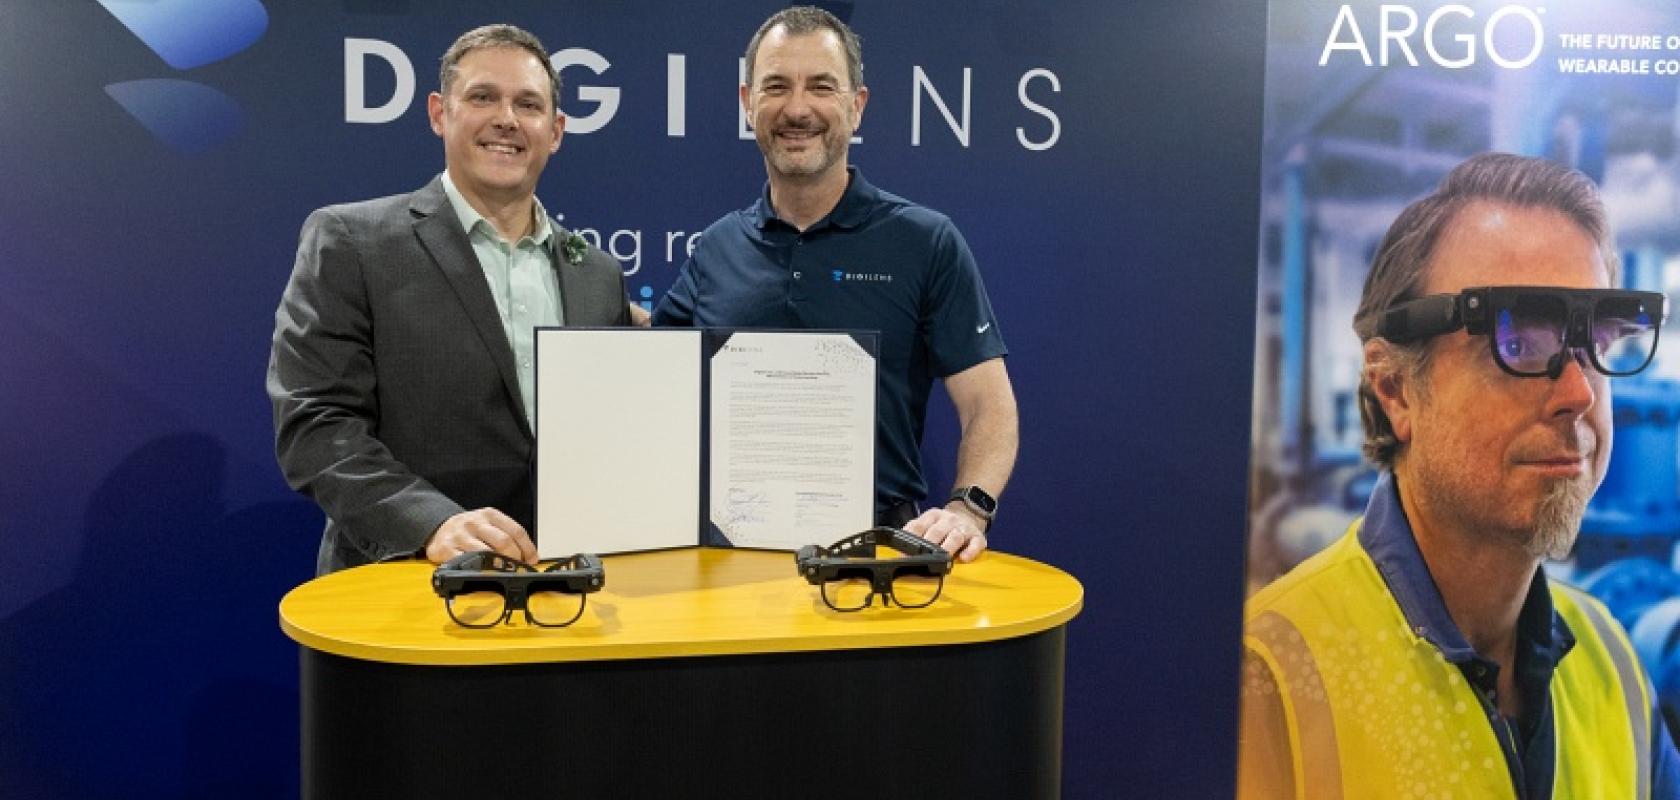 Ashley Stowe, director of Oak Ridge Enhanced Technology and Training Center (l), and Chris Pickett, DigiLens CEO (r), both sign government contracts